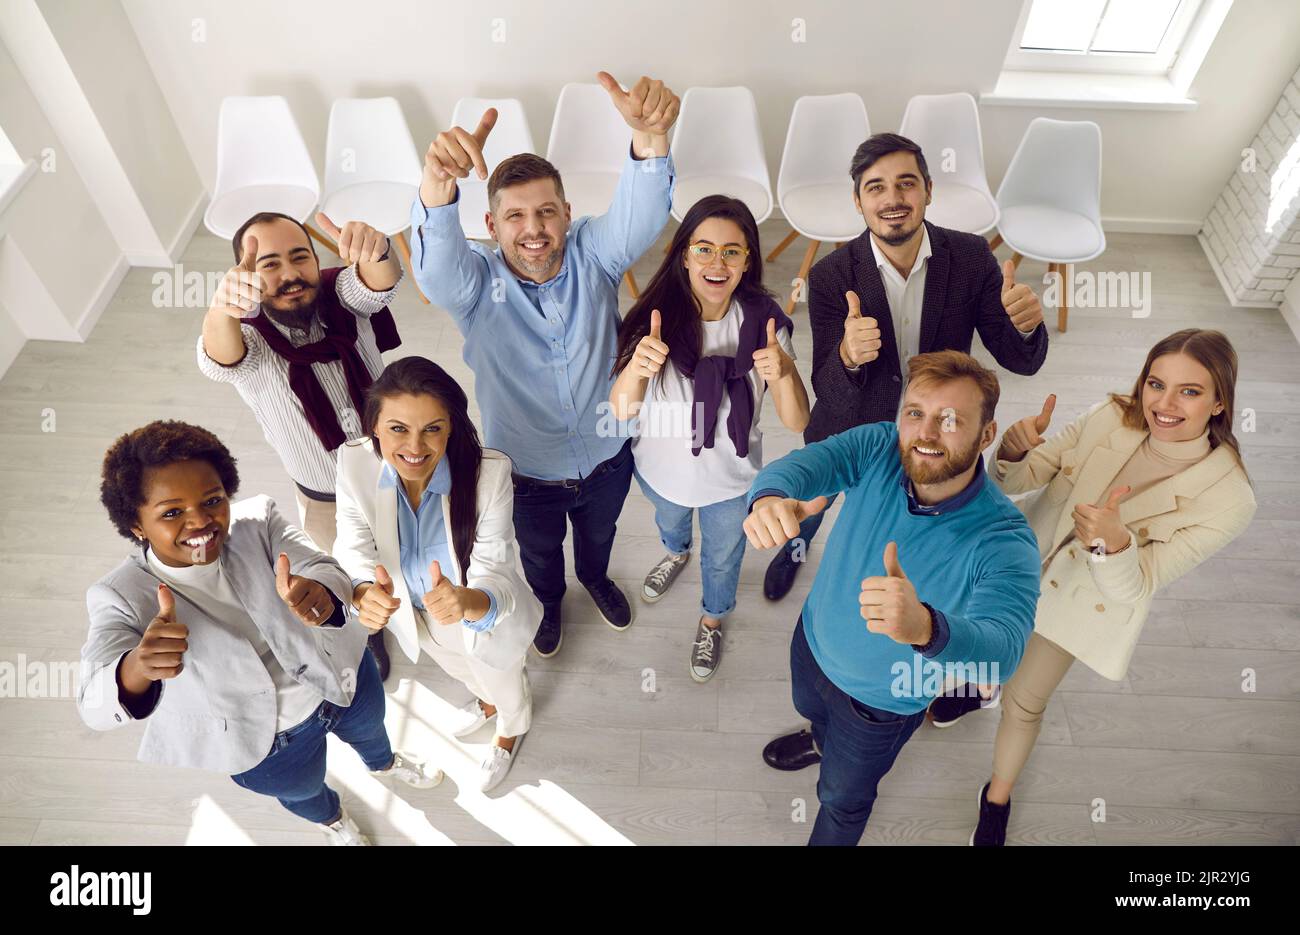 Team of people who make happy gesture by raising their hands with thumbs up demonstrating success. Stock Photo